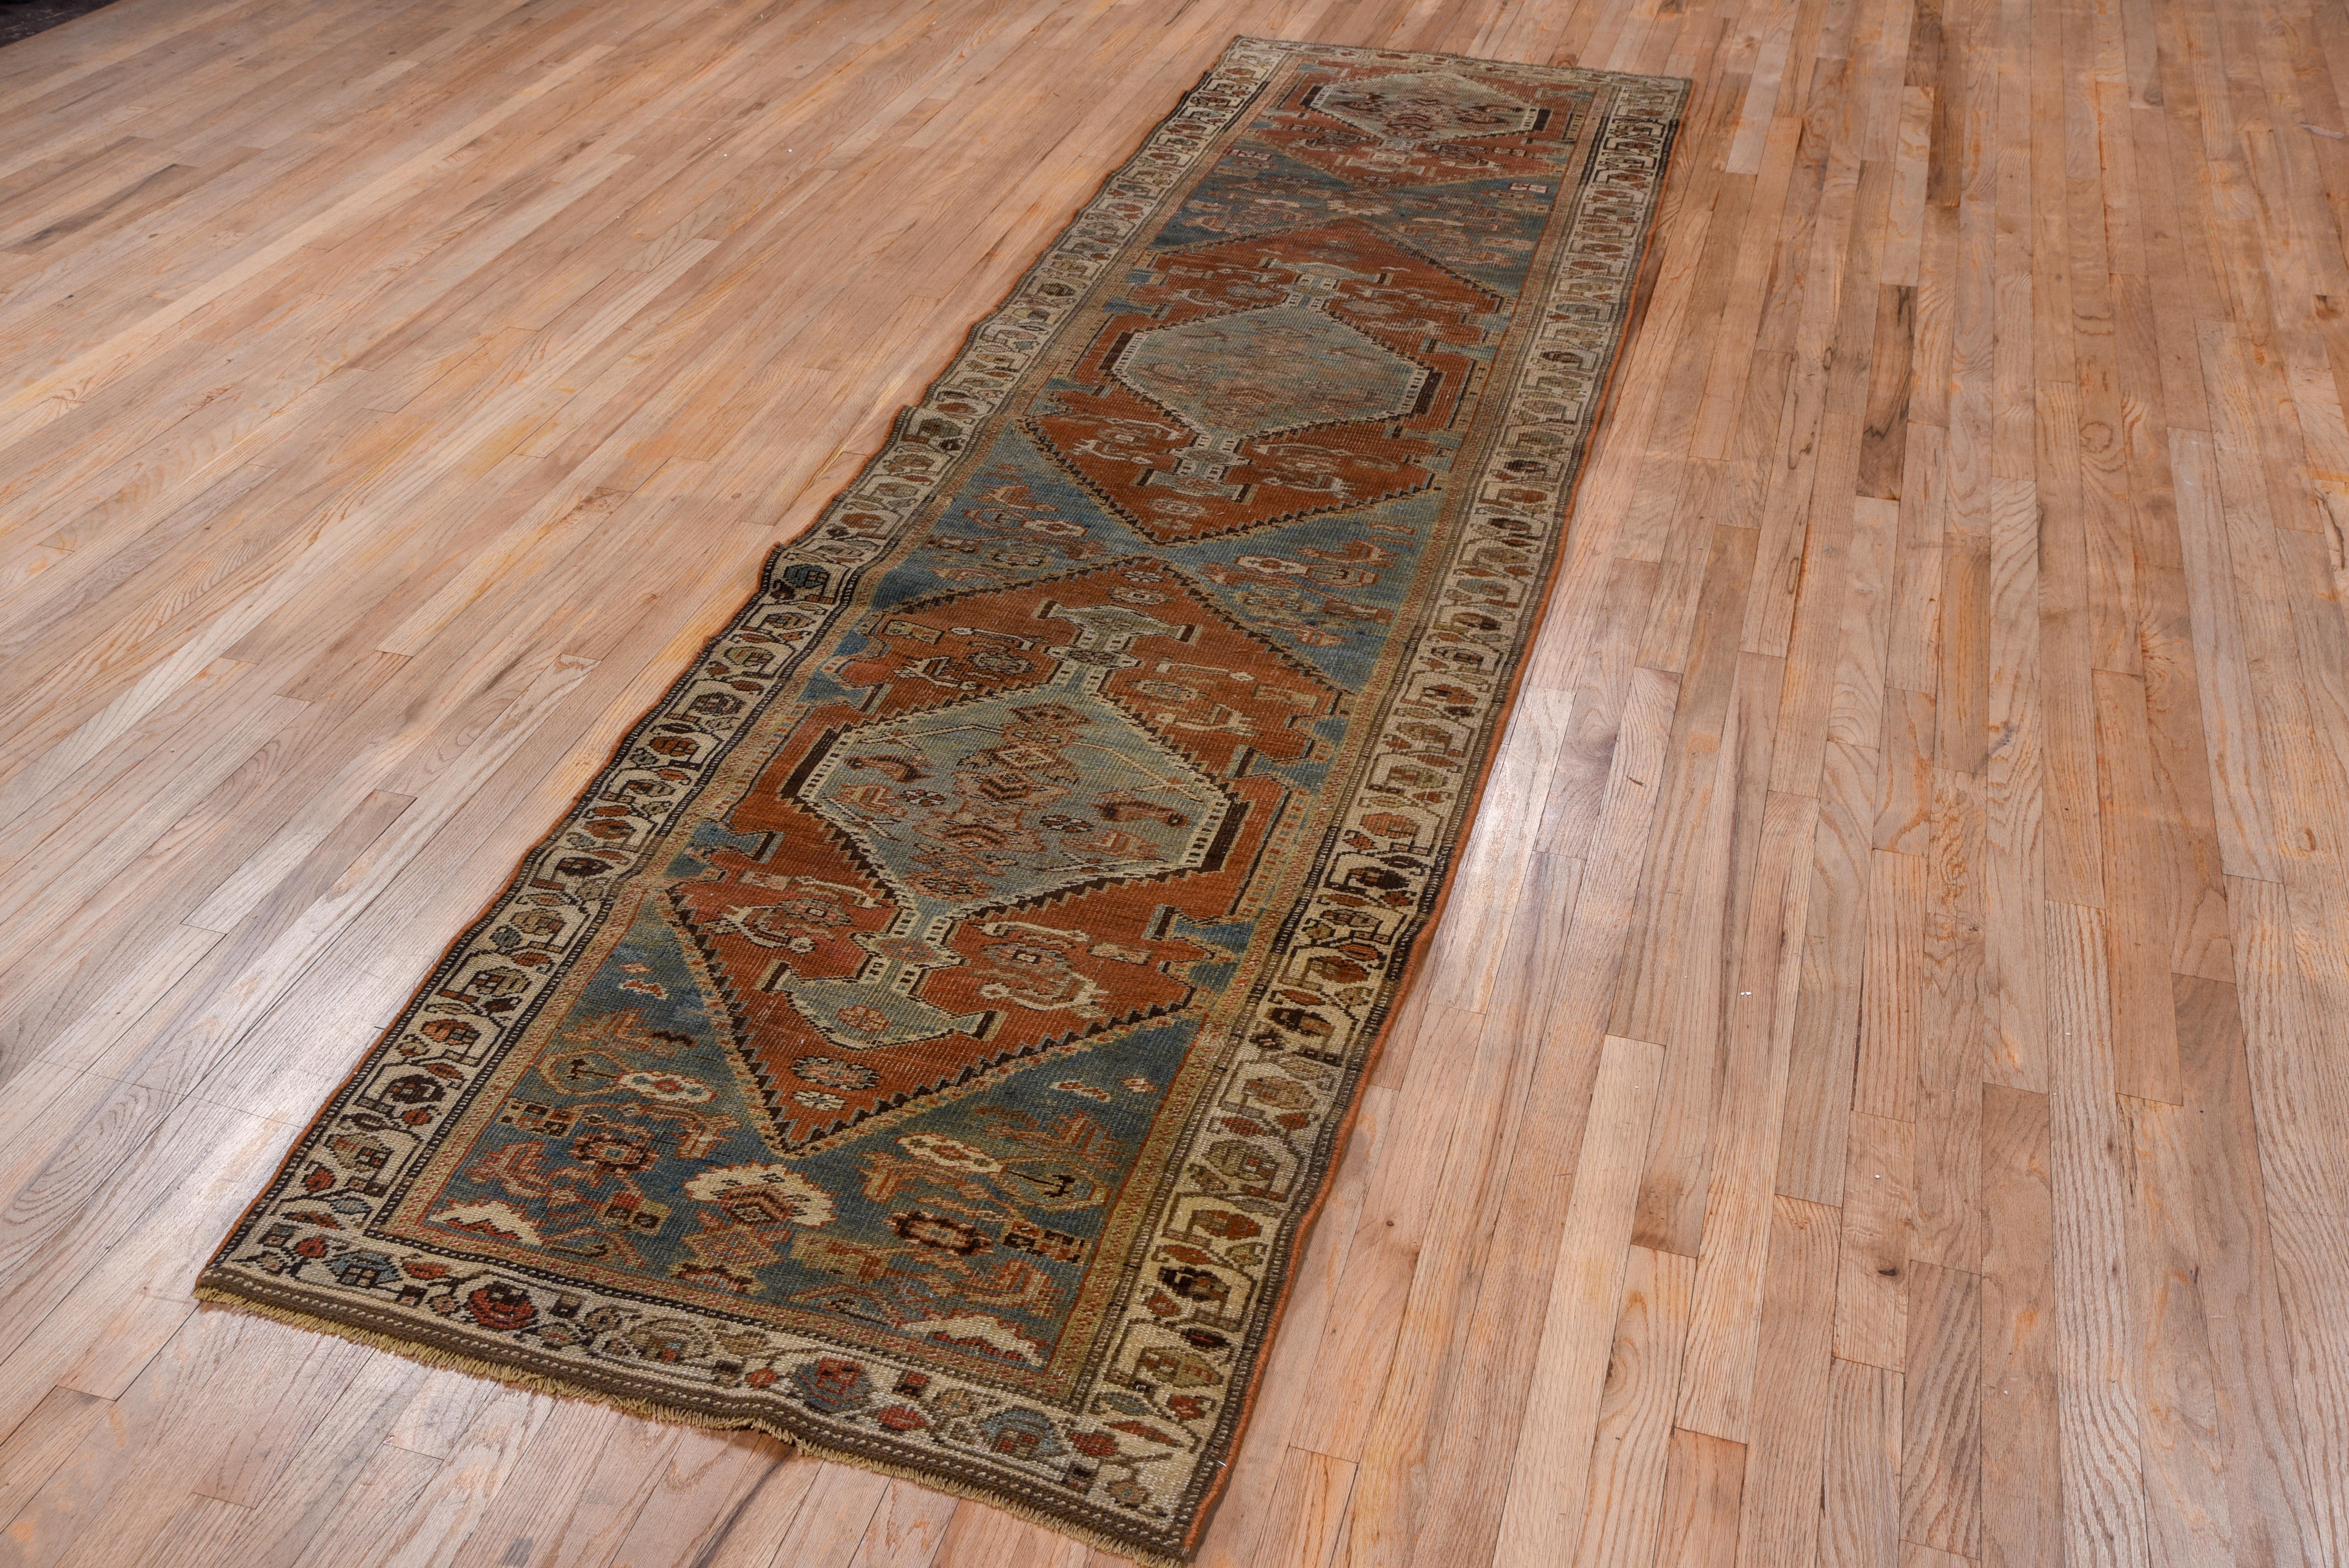 A NW Persian village runner creation, nearly three complete red hexagonal panels display pale green pendanted medallions with light blue side filler triangles and scatters of flattened 'fish' leaves. The cream border features a tendril with round